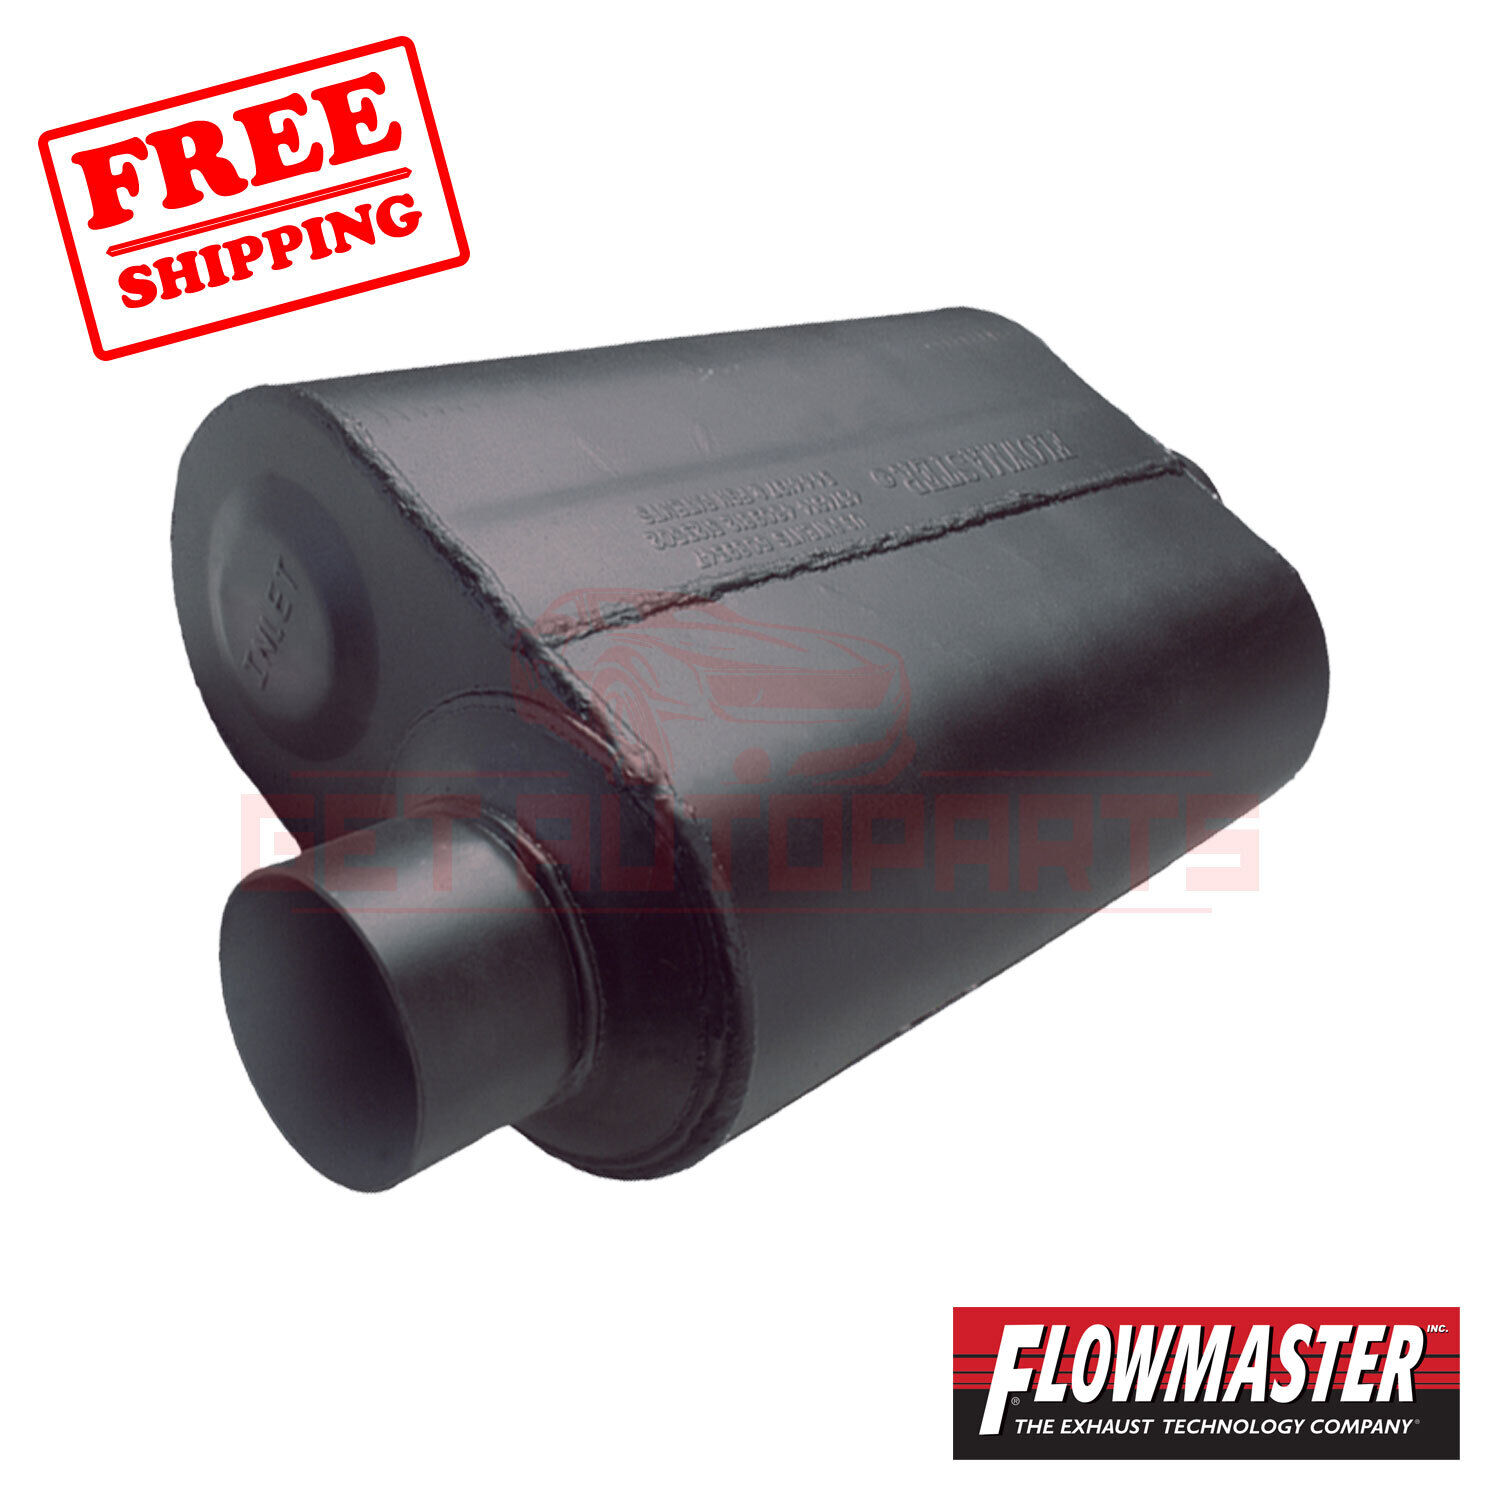 FlowMaster Exhaust Muffler for 1970-1974 Plymouth Barracuda